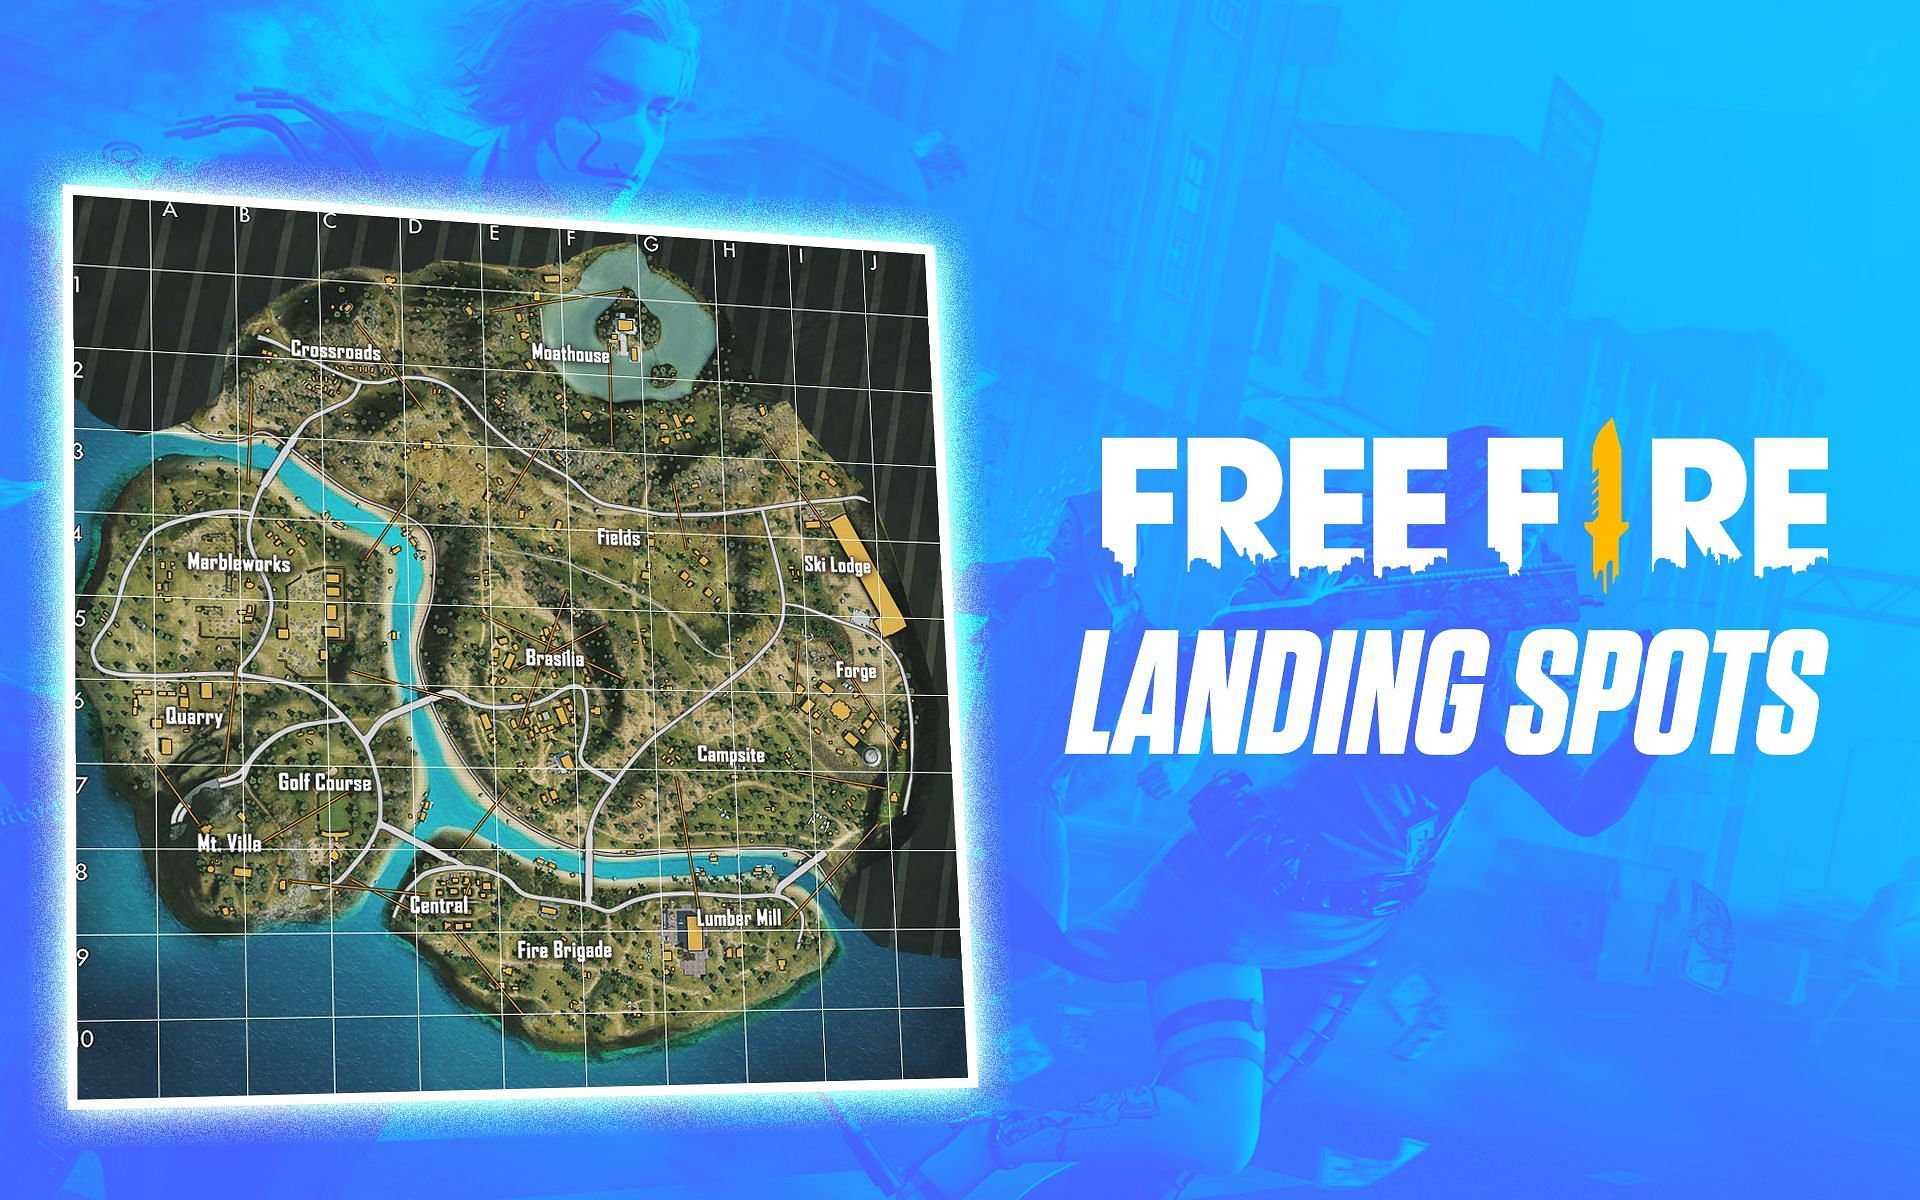 Purgatory is one of the most played maps in Free Fire (Image via Sportskeeda)